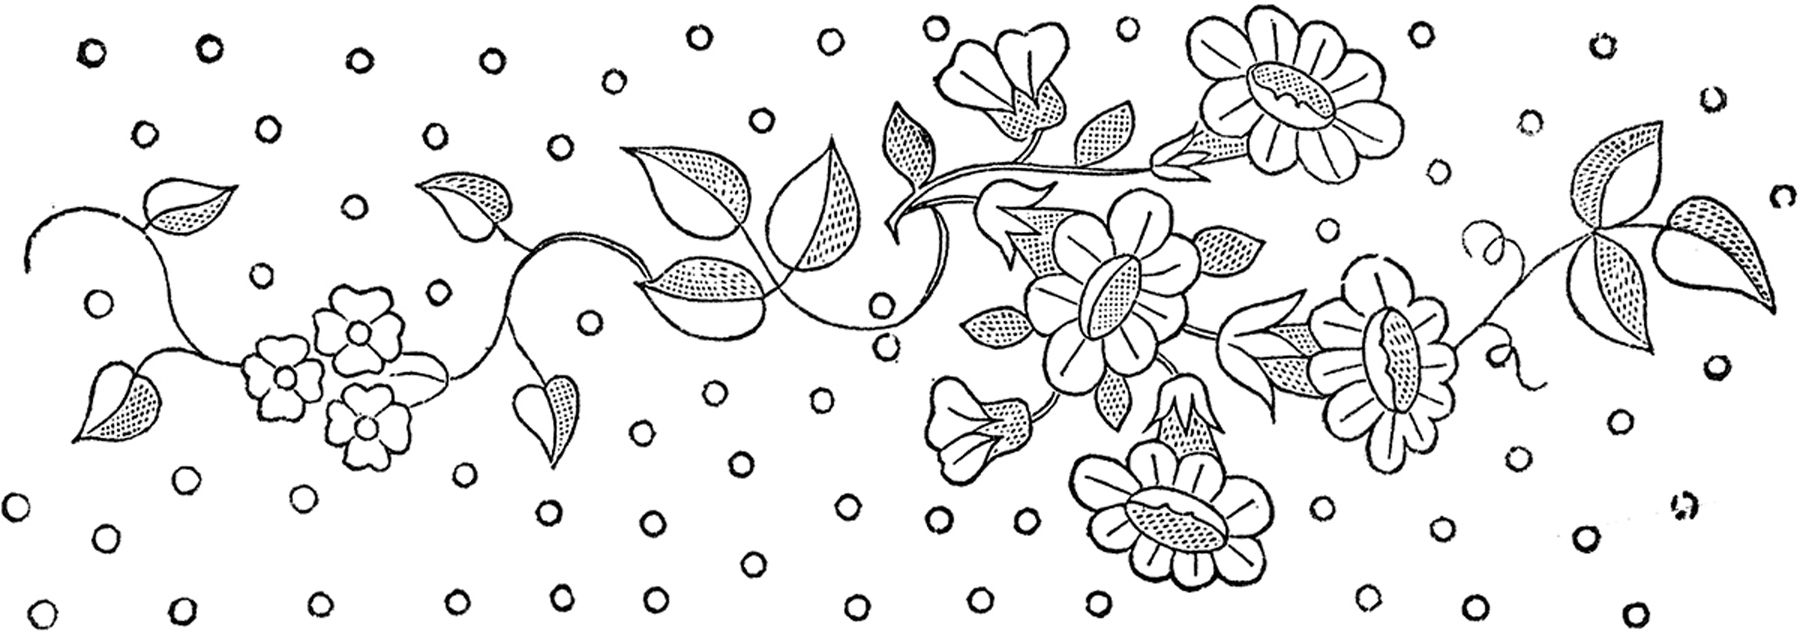 Embroidery Design Patterns Floral Embroidery Patterns Pretty The Graphics Fairy